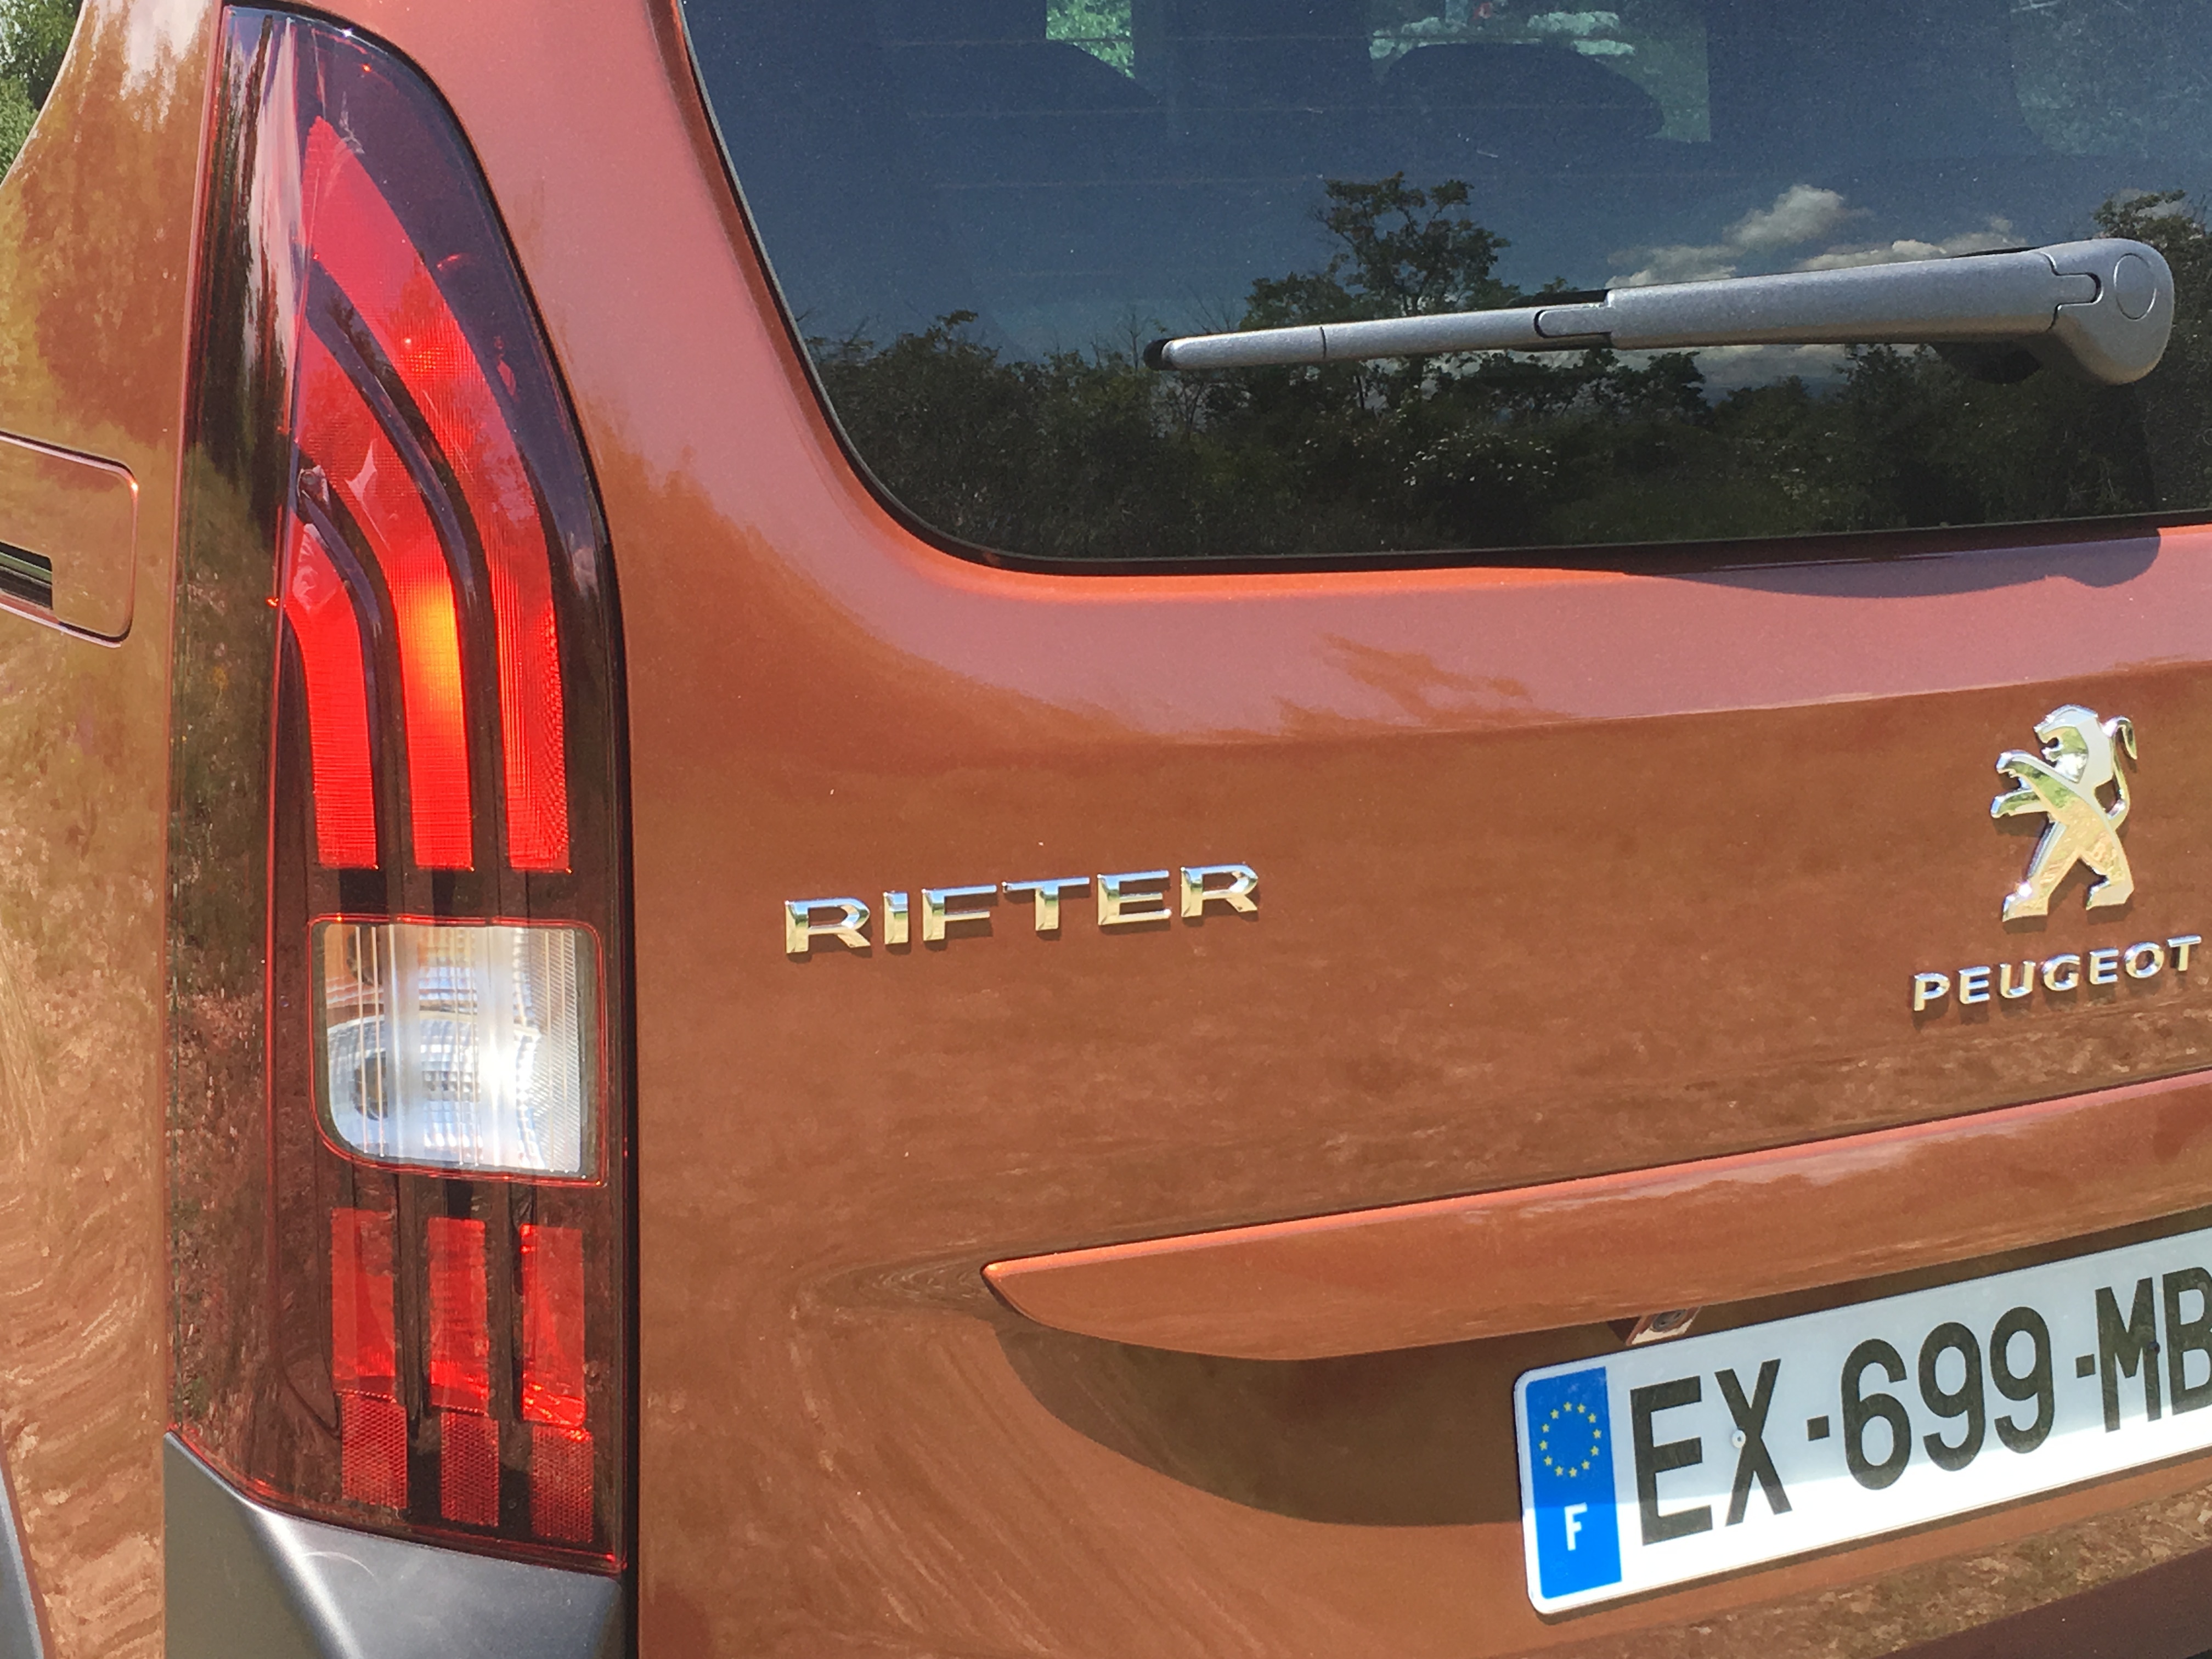 Peugeot Rifter hd specifications